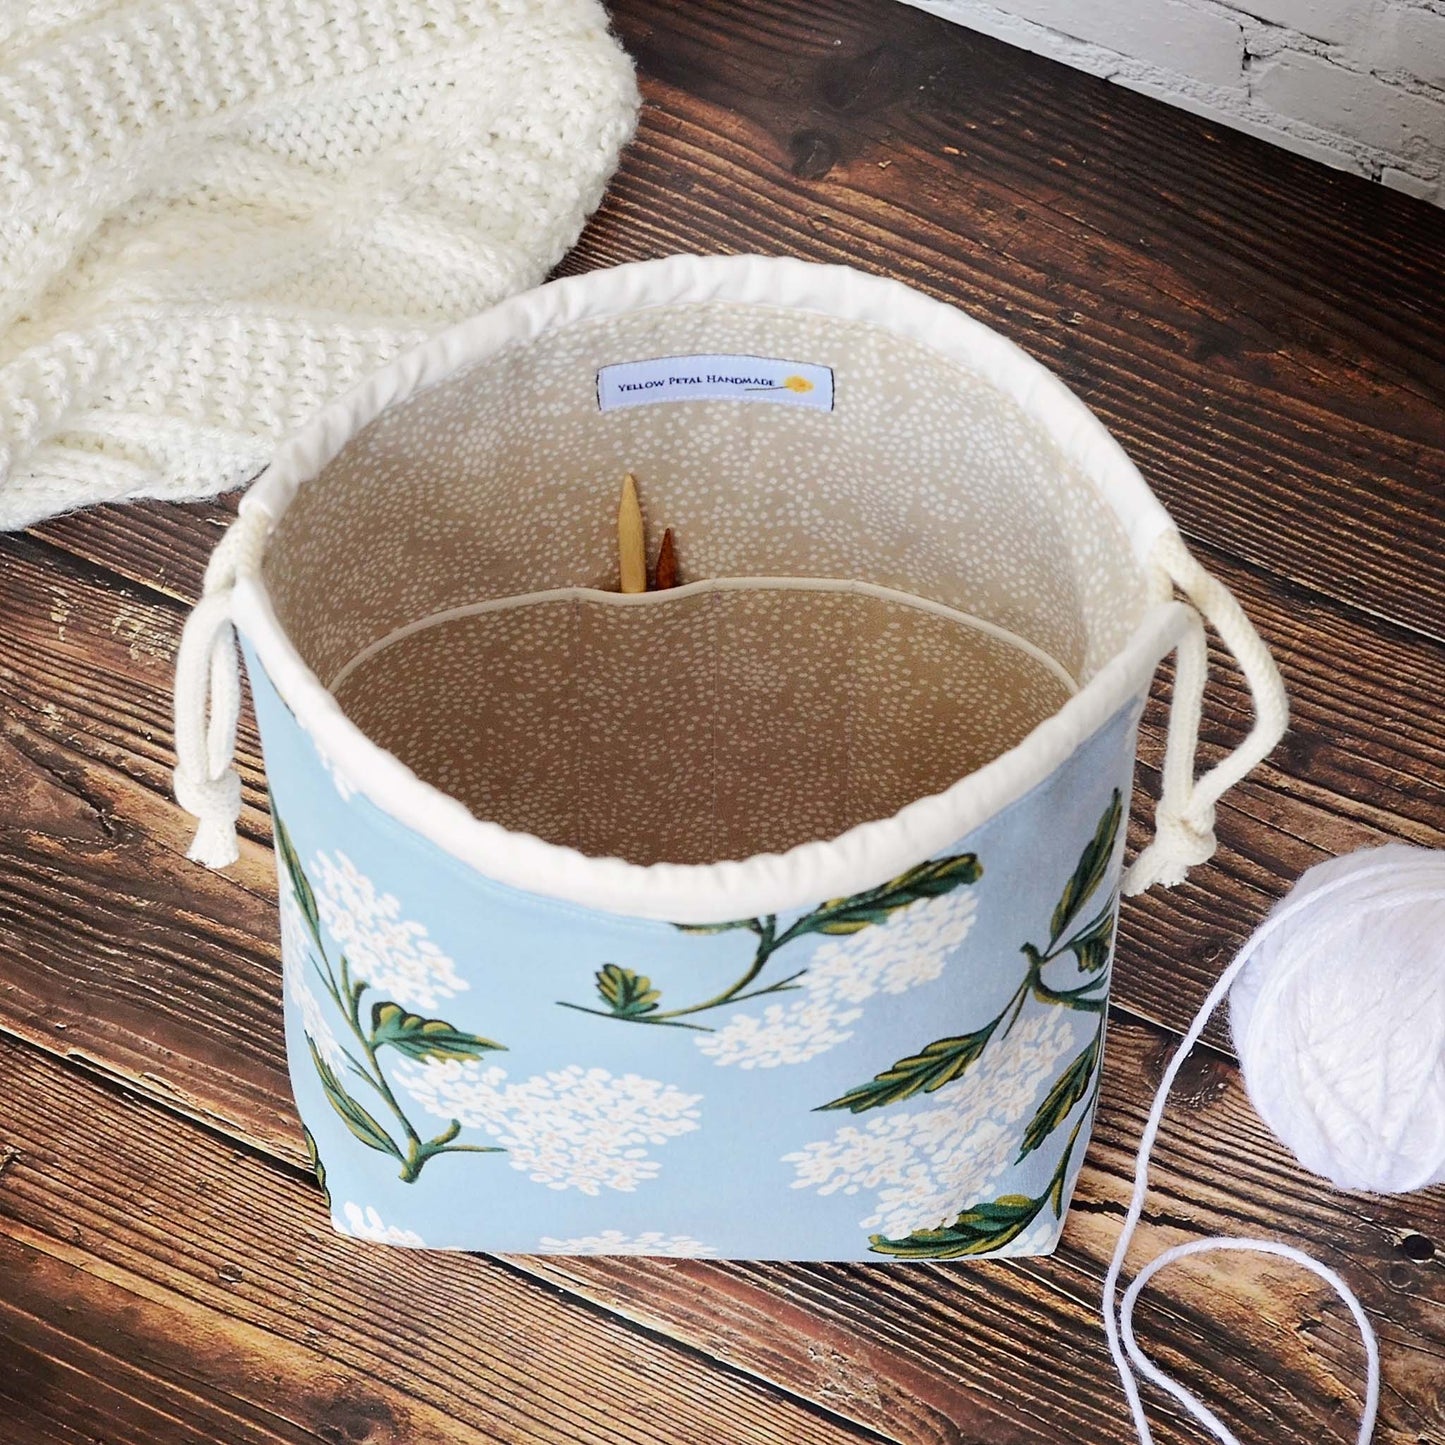 Pretty Drawstring Project Bag with Pockets in Pale Blue Hydrangeas